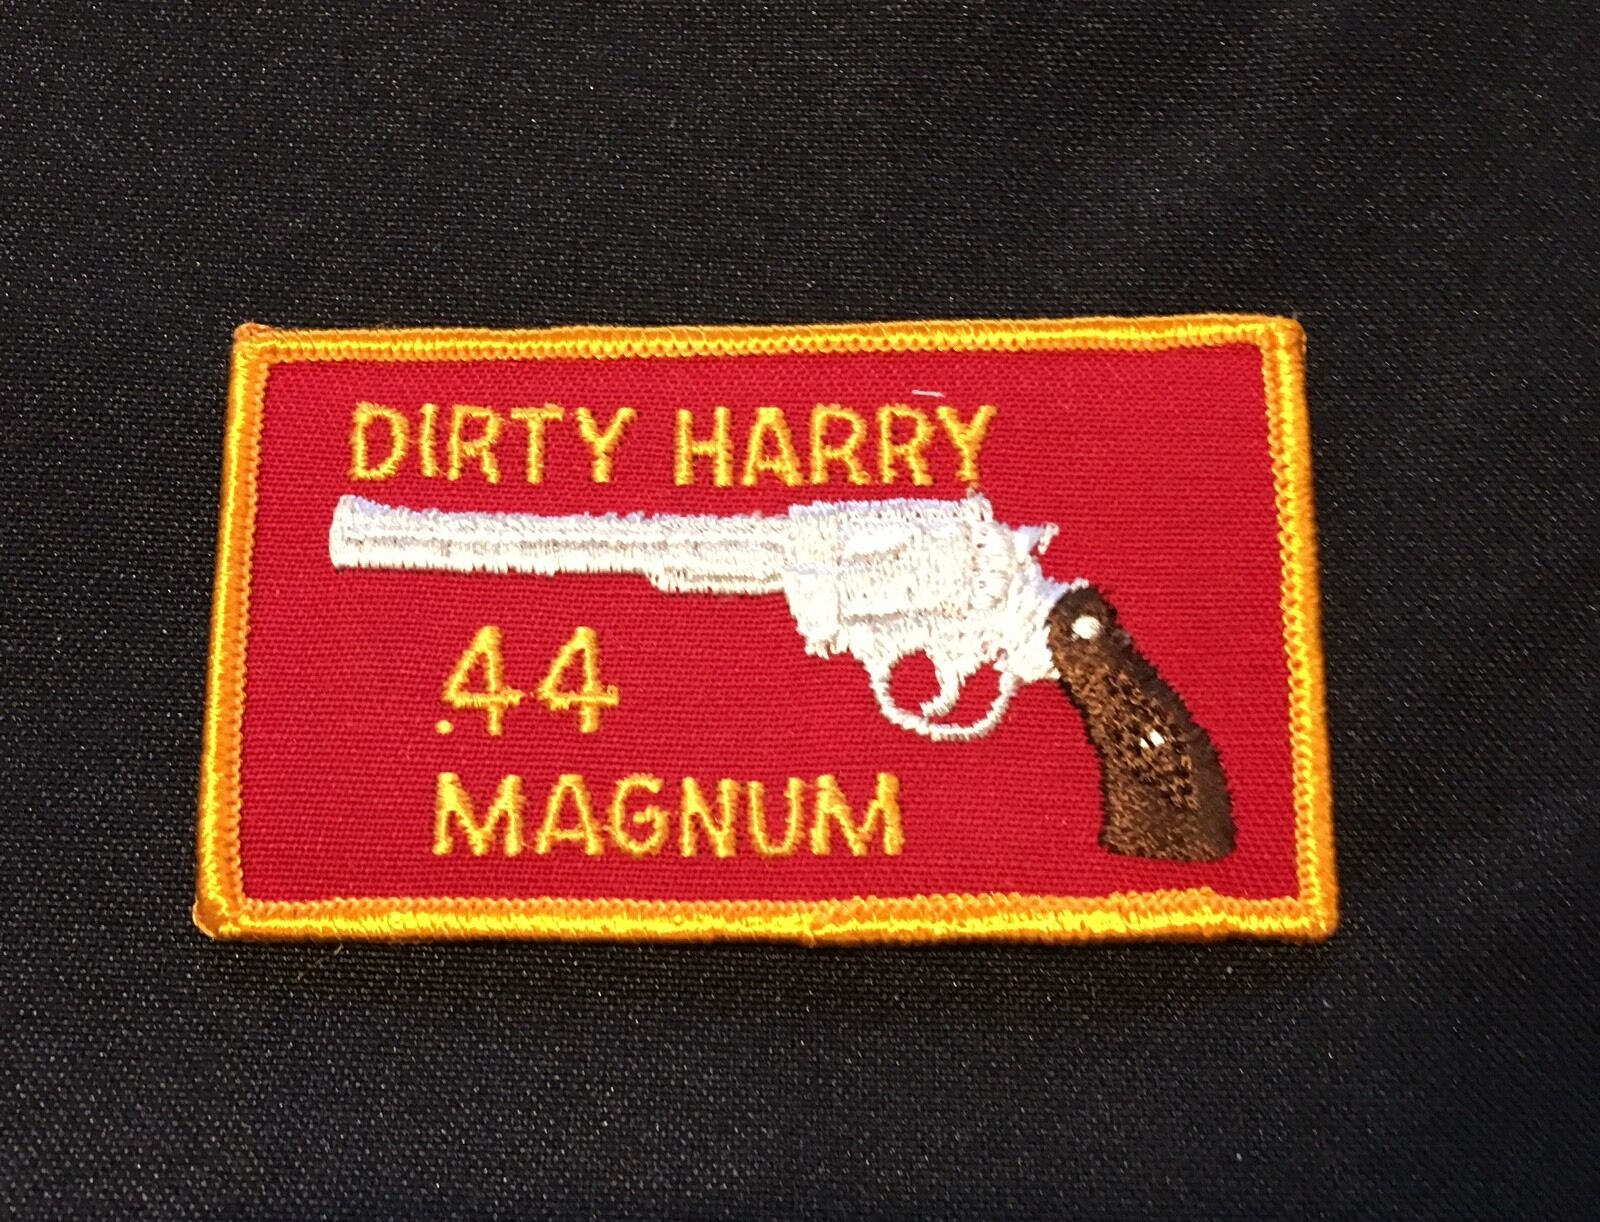 ~~FIREARMS~~ Dirty Harry .44 MAGNUM" Patch !!!